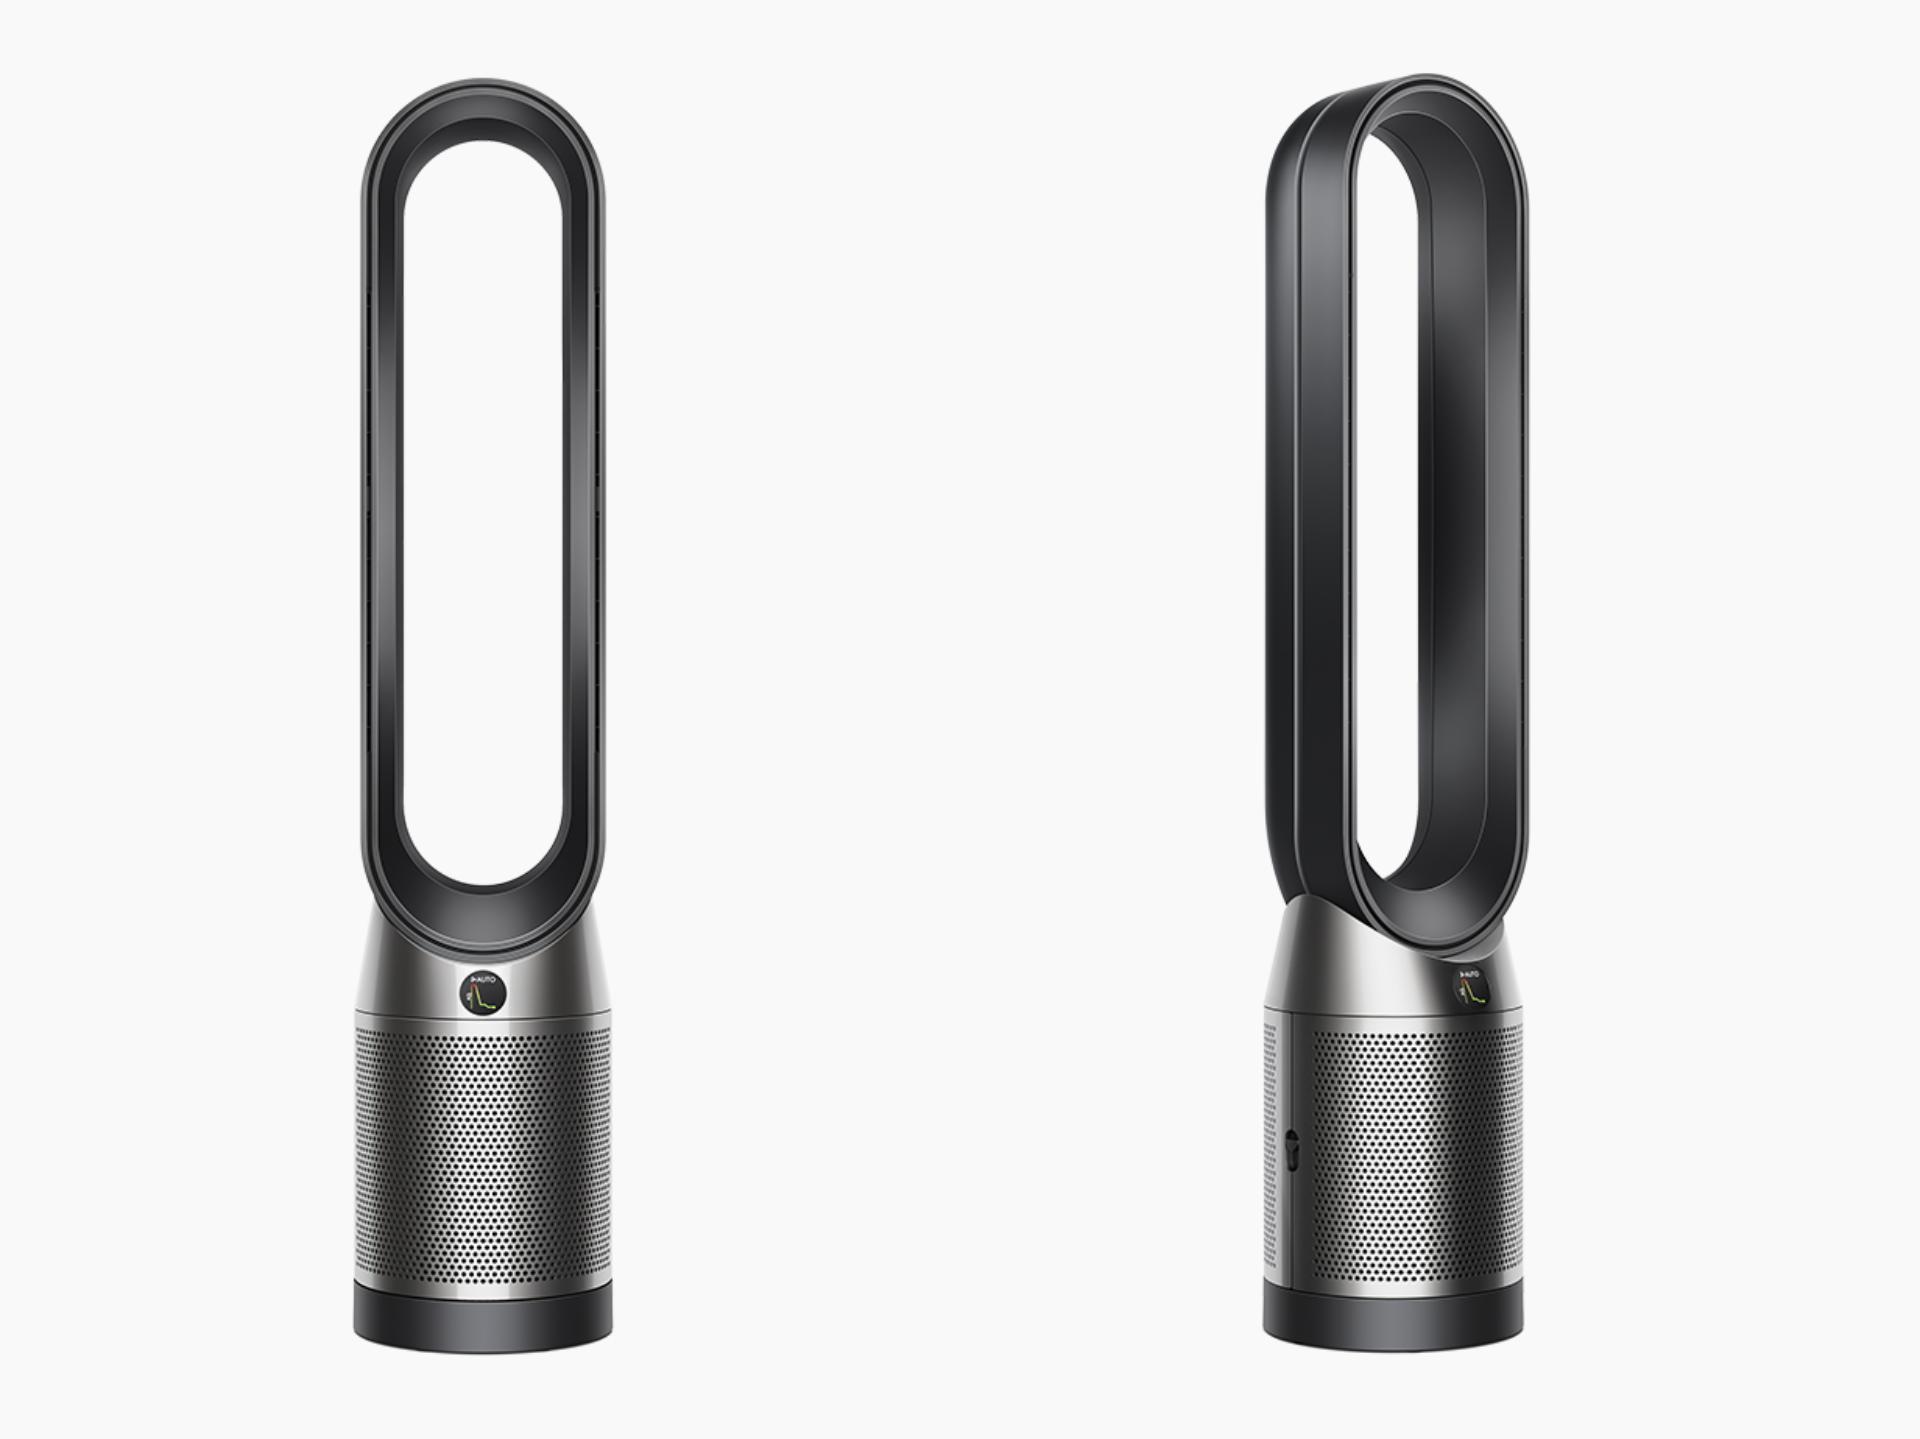 Different angles of the Dyson Purifier Cool purifying fan heater